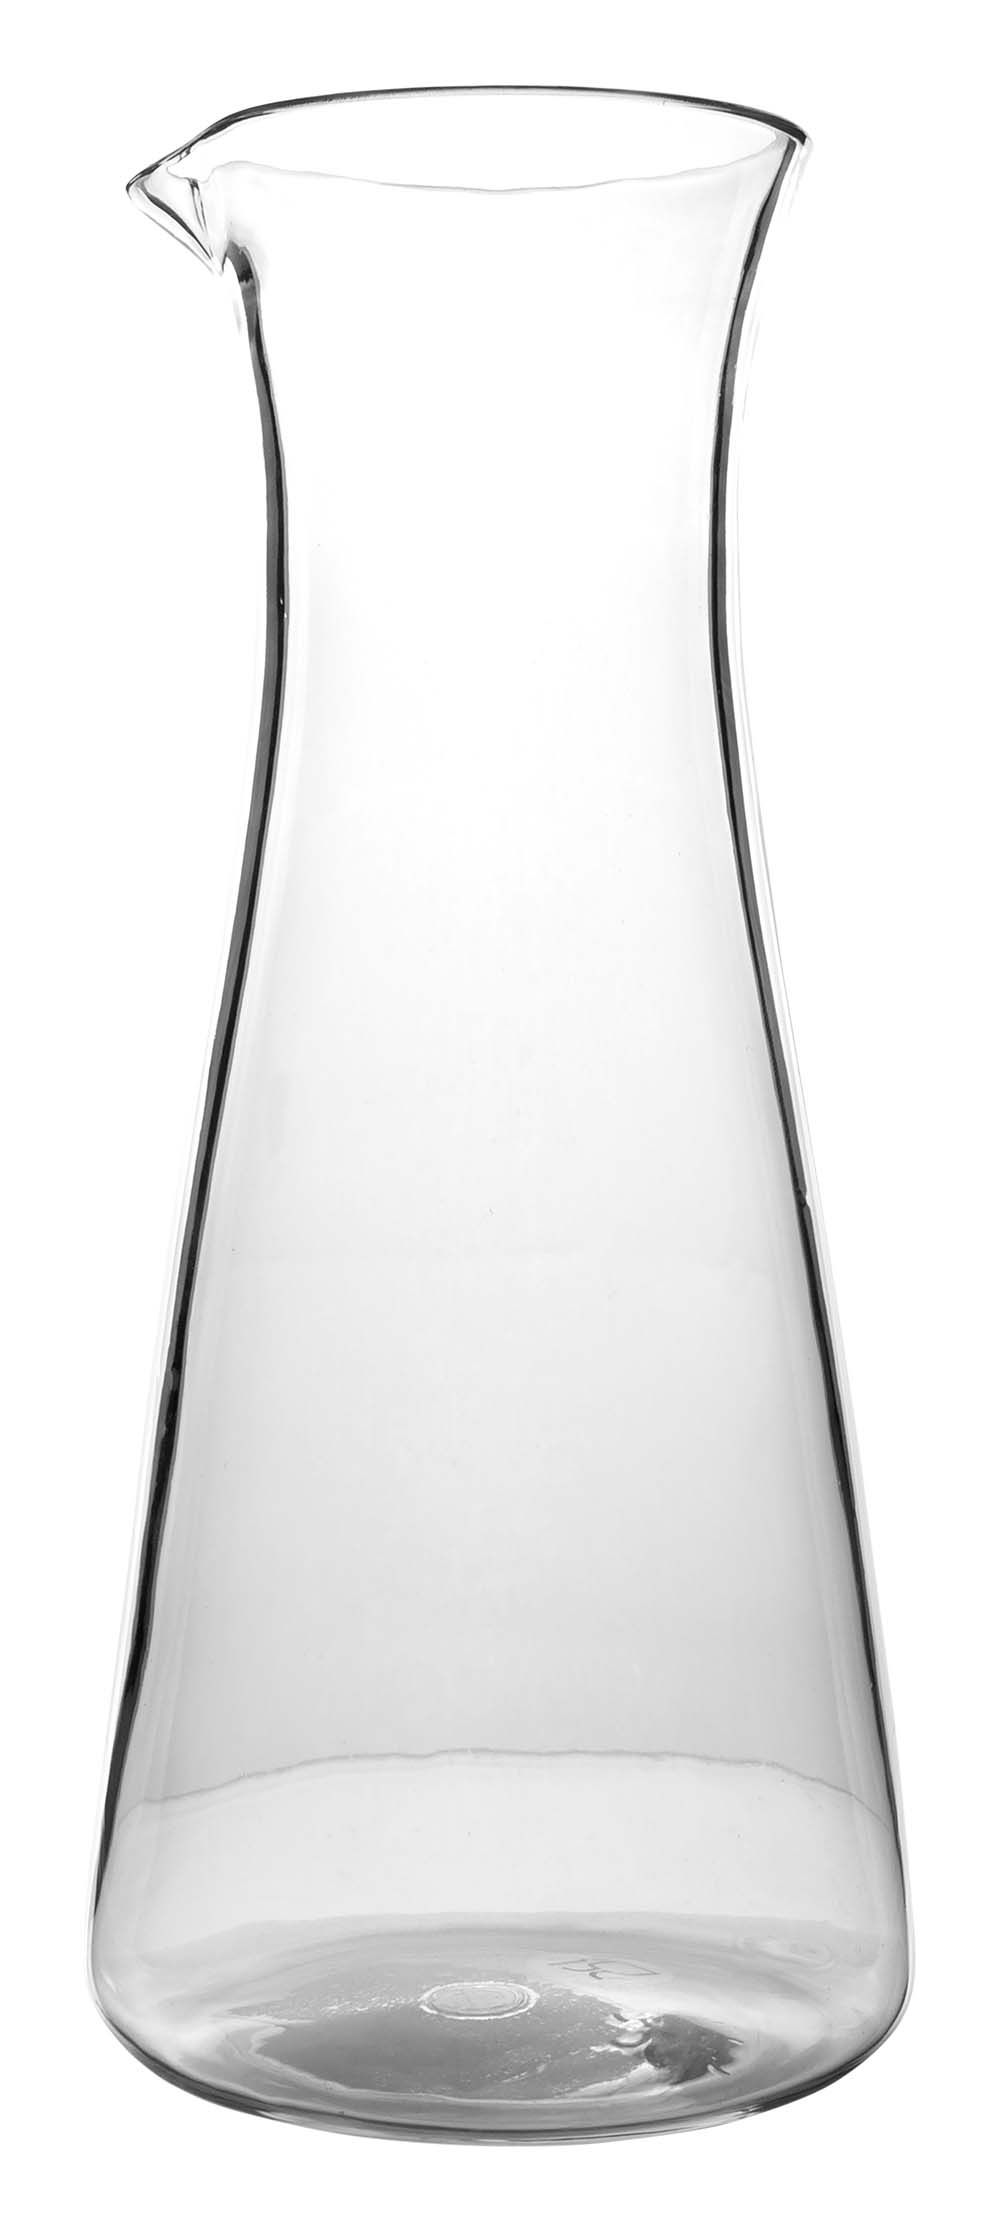 6101380 Extra-strong, luxury carafe. Made from 100% polycarbonate. This makes the carafe virtually unbreakable, lightweight and scratch resistant. The carafe is also dishwasher safe.